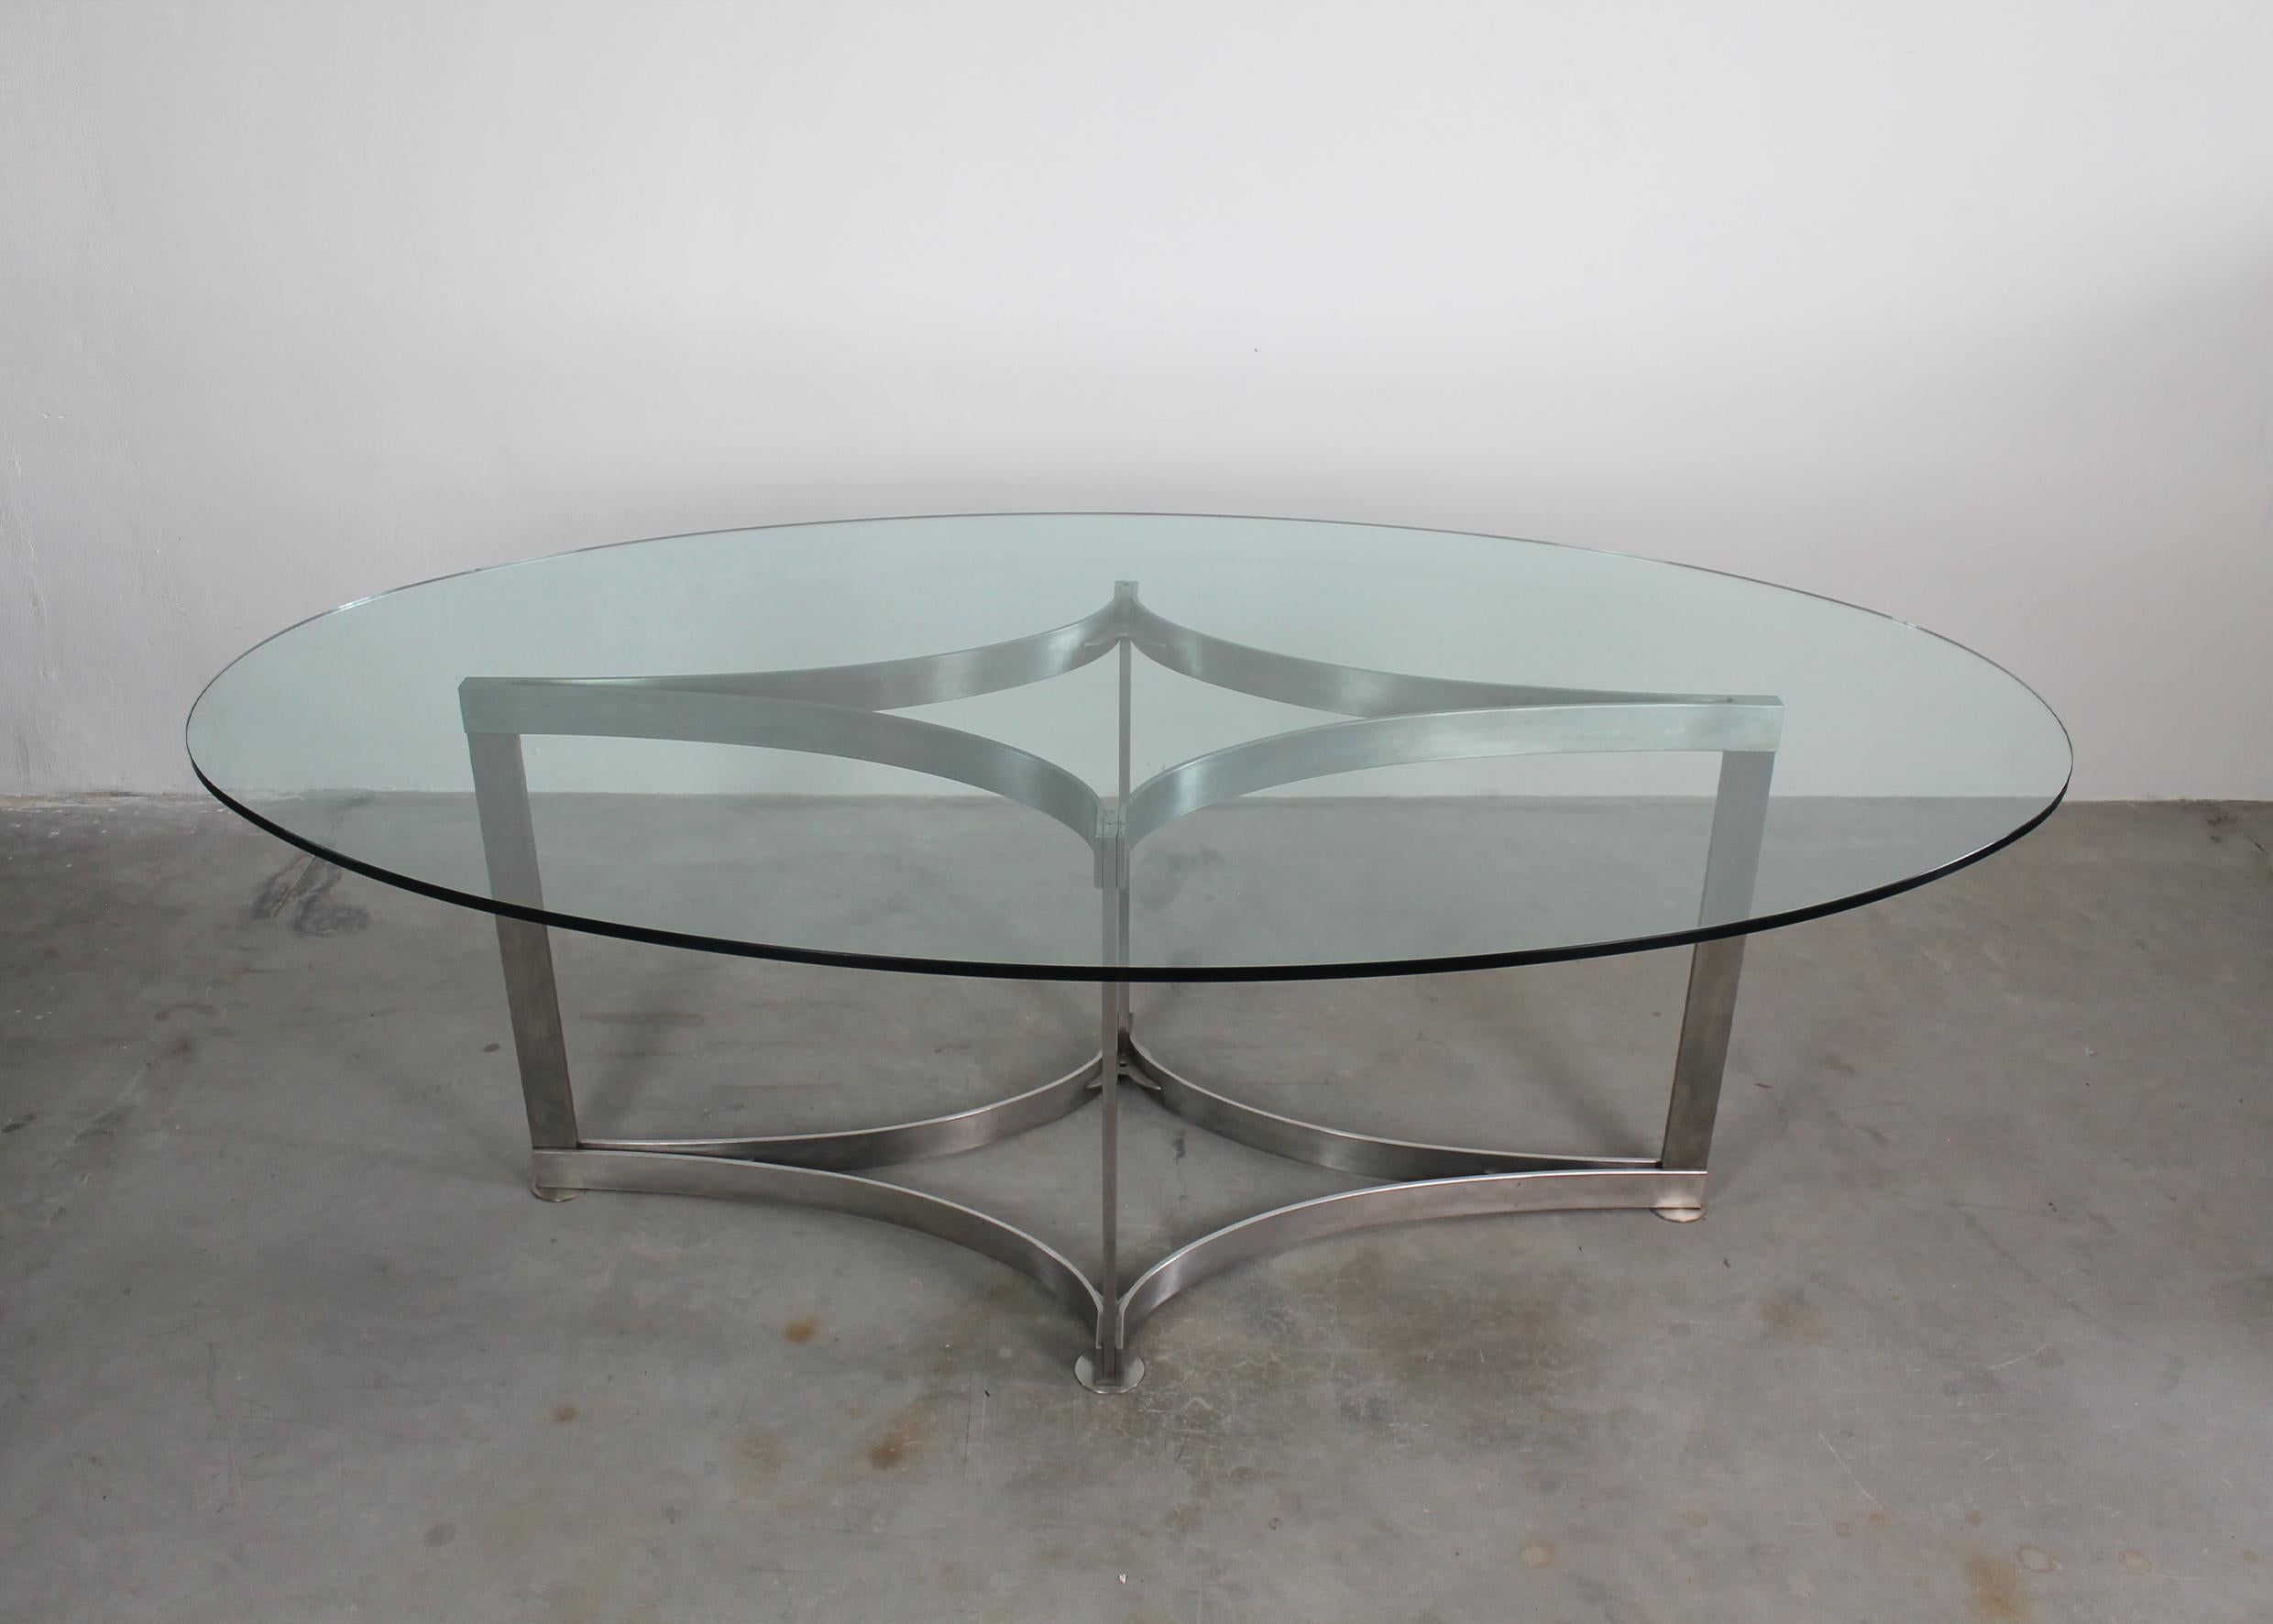 Dining table with a beautiful base in steel and top in thick glass, designed by Vittorio Introini and manufactured by Saporiti in the 1970s.

The table present an elegant and beautiful decorative steel base diamond shaped visible thought the table